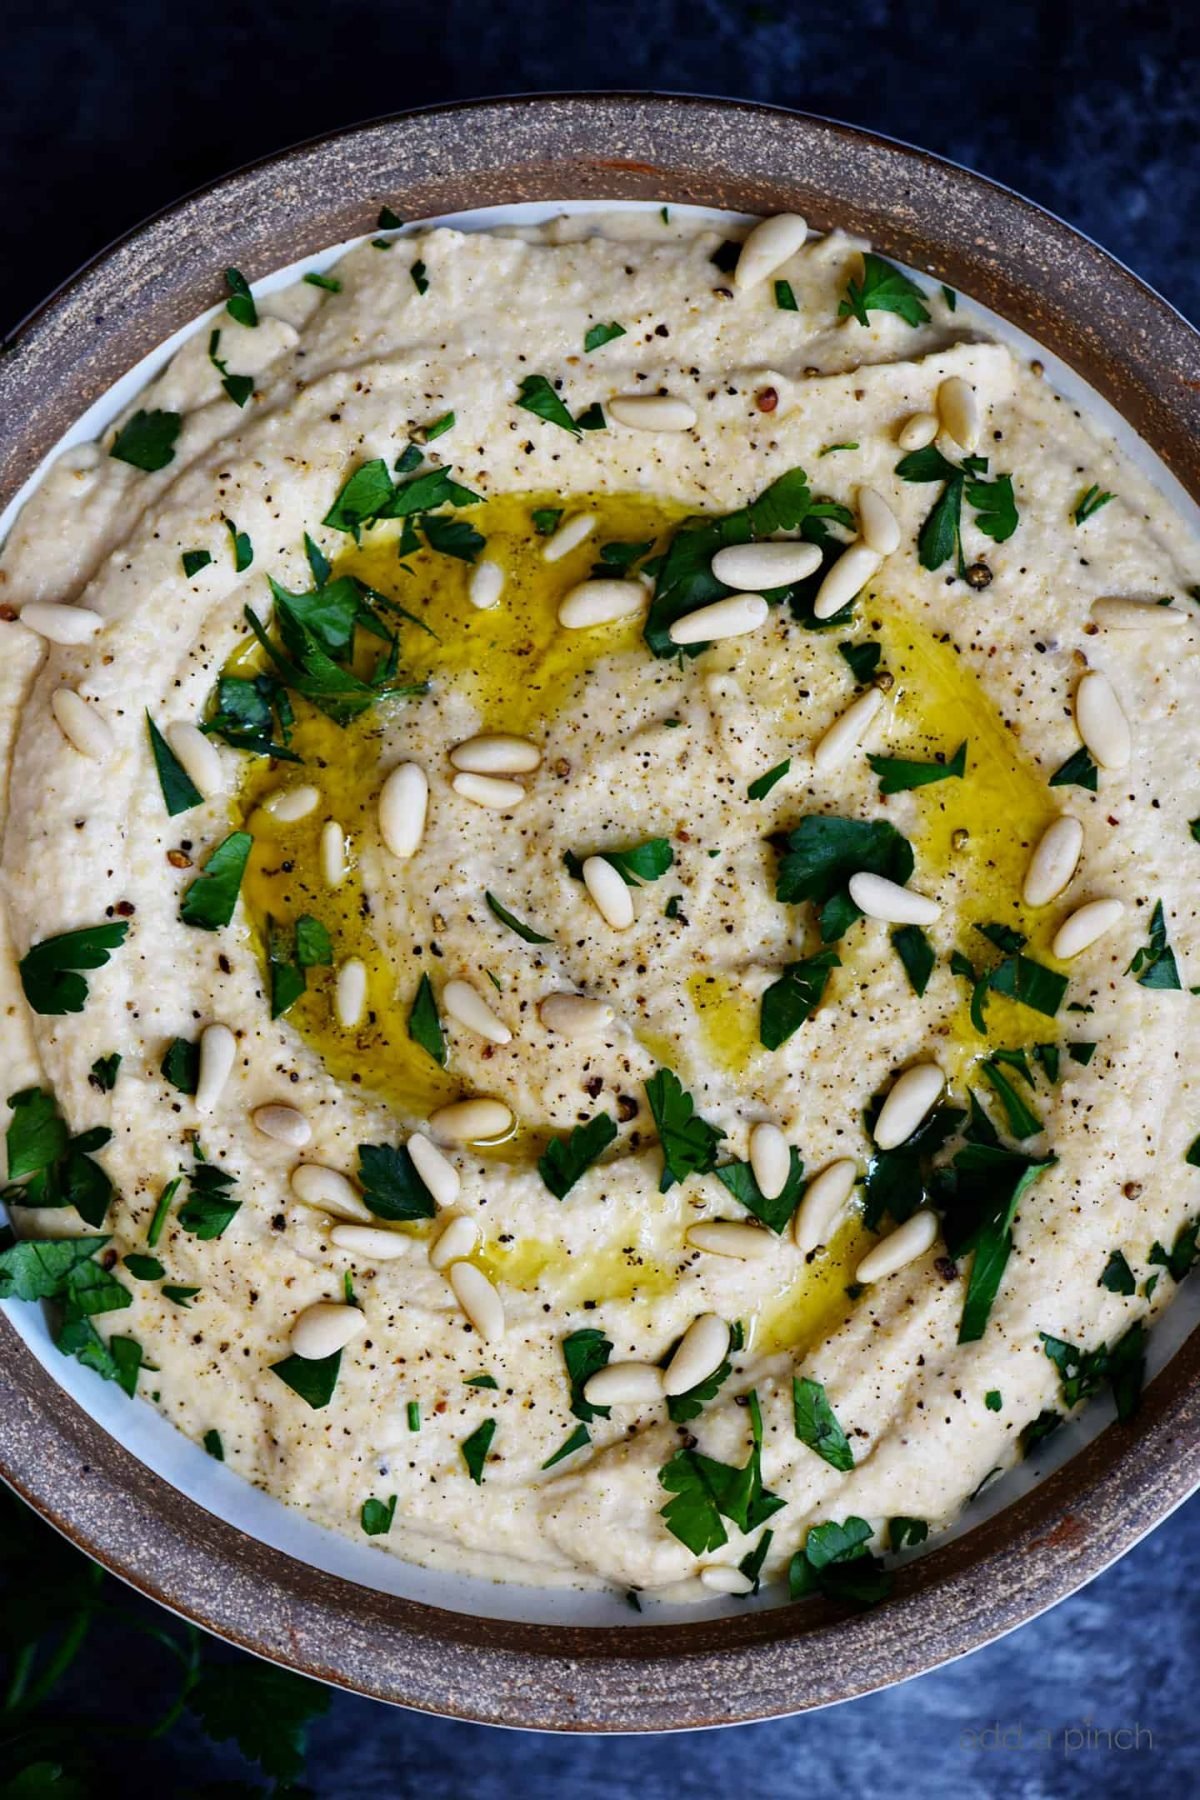 Classic Hummus Recipe - A traditional hummus recipe ready in minute! Perfect to serve as a snack, appetizer, or spread for sandwiches and wraps! // addapinch.com